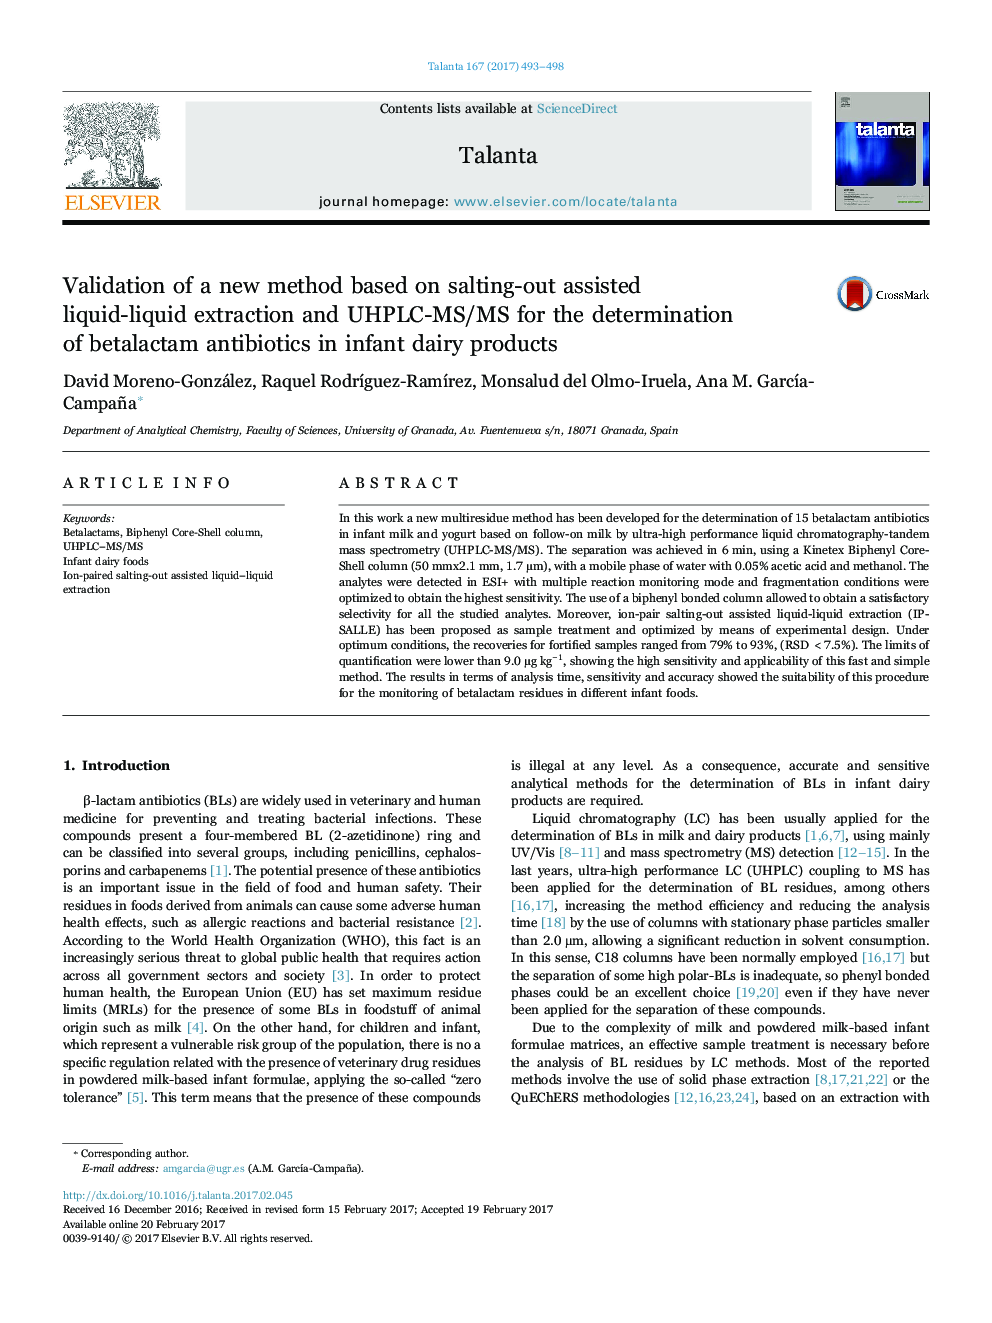 Validation of a new method based on salting-out assisted liquid-liquid extraction and UHPLC-MS/MS for the determination of betalactam antibiotics in infant dairy products